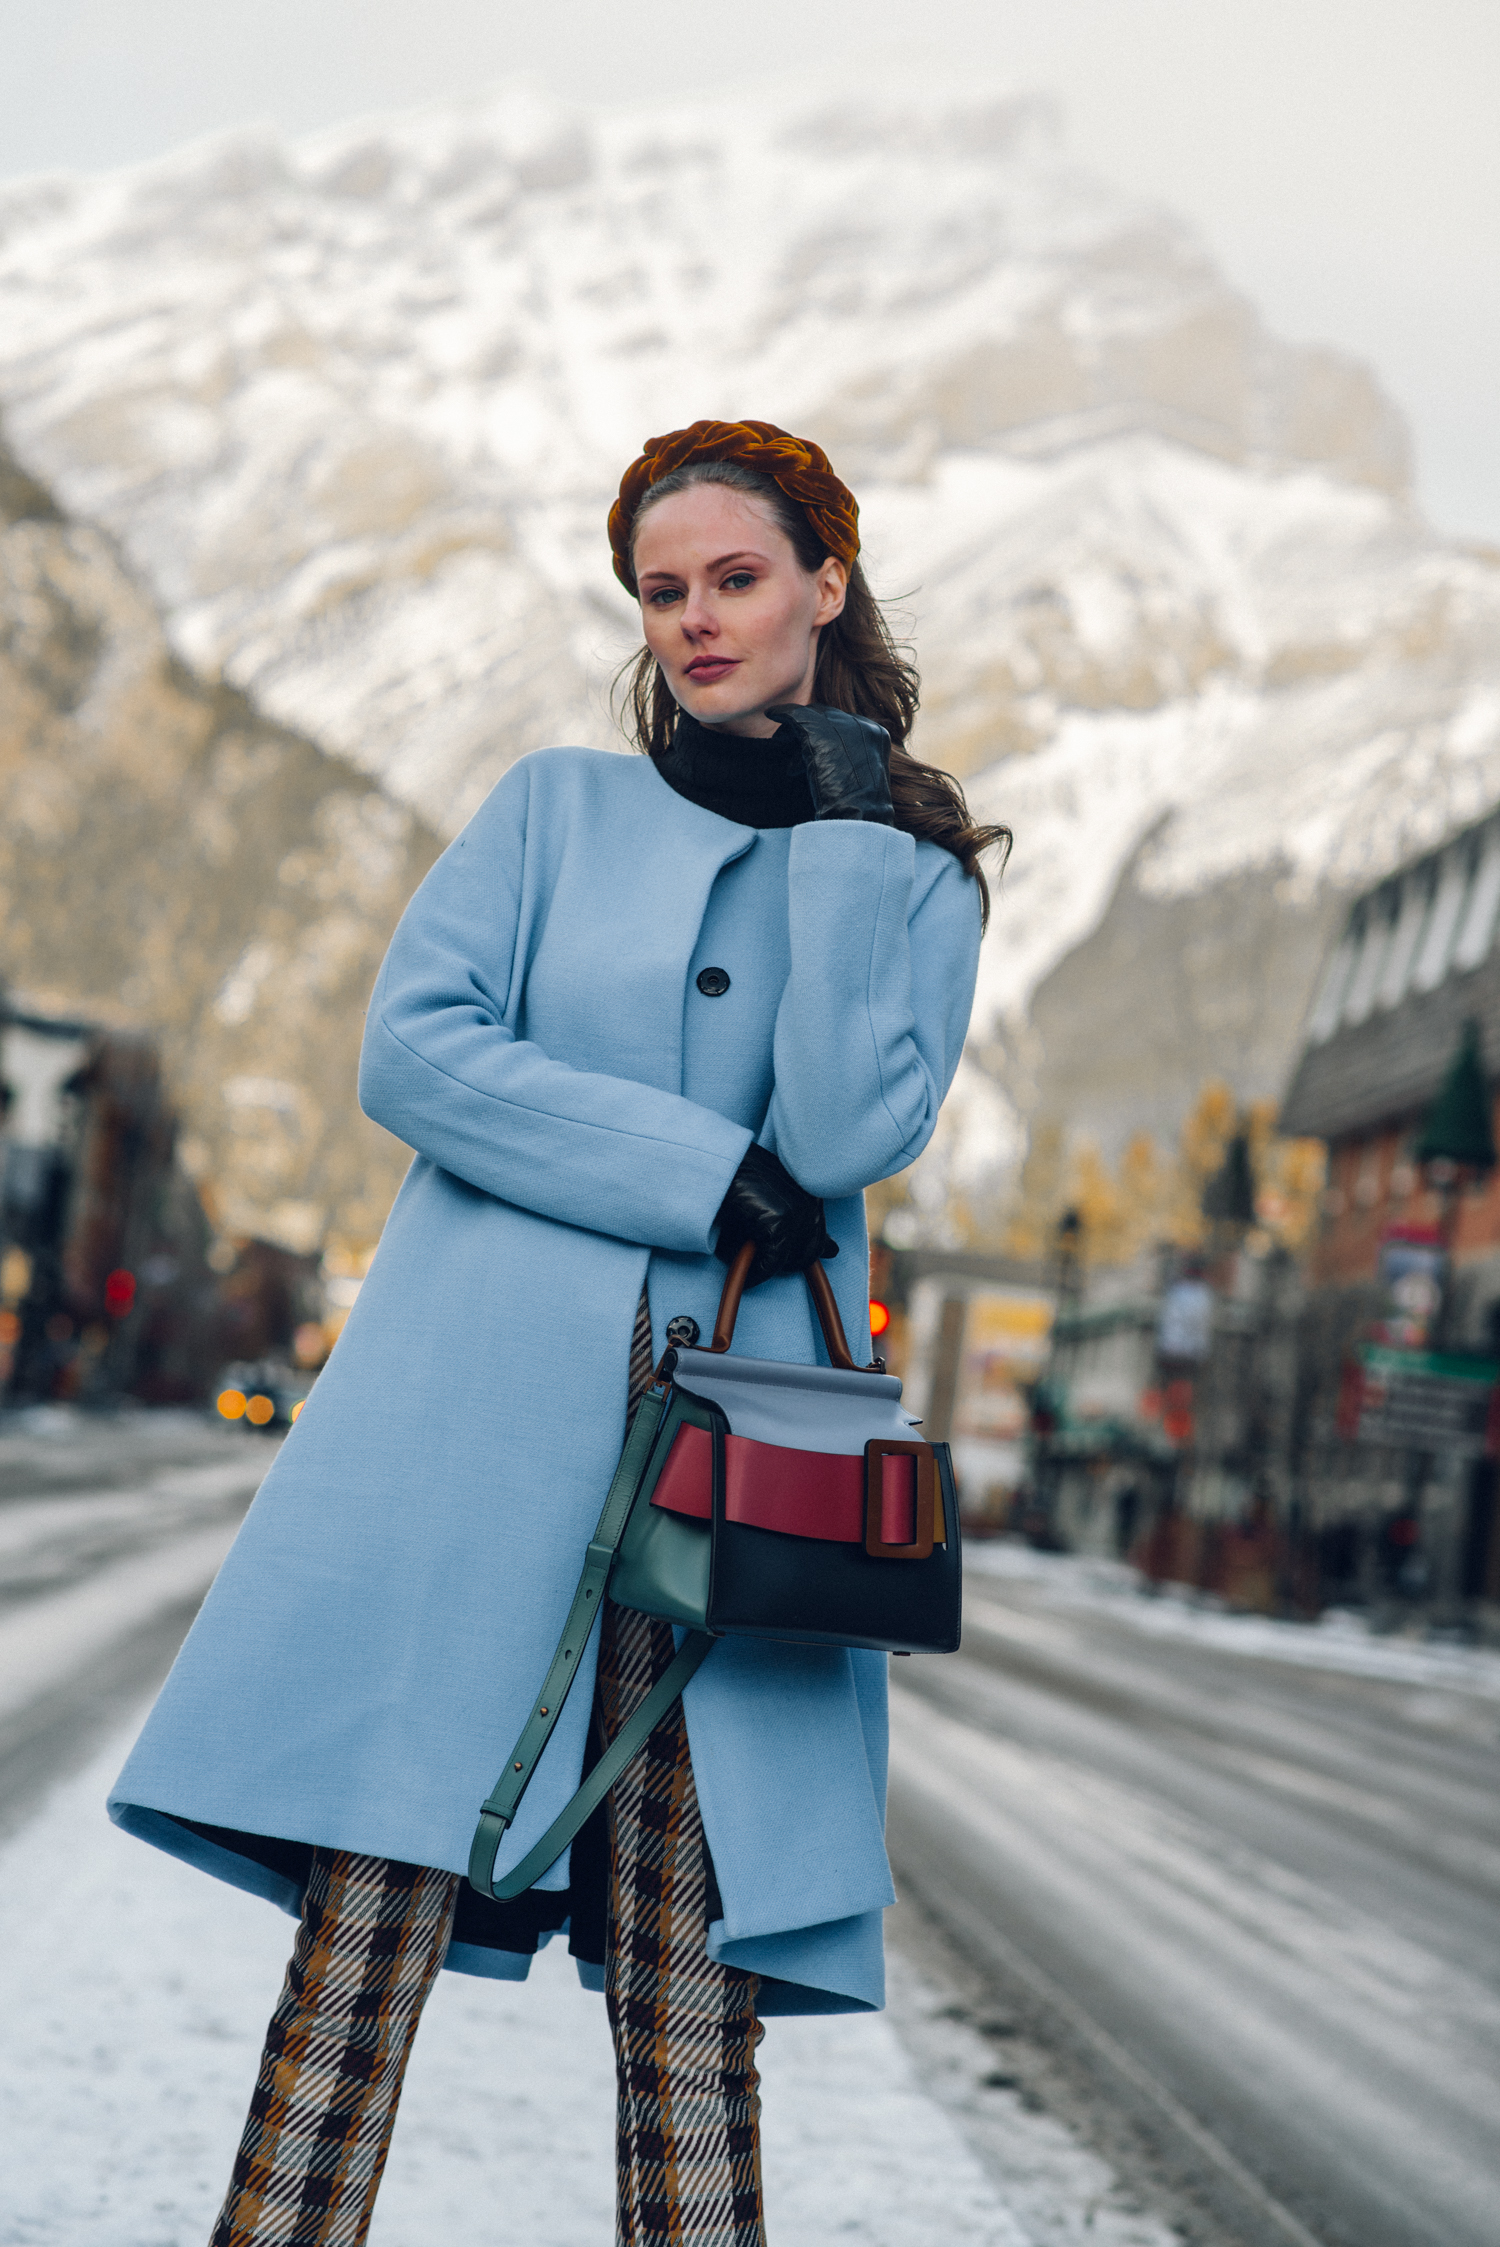 Alyssa Campanella of The A List blog experiences romance in the snow with her husband in Banff, Alberta, Canada wearing Jennifer Behr Lorelei headband and Boyy Boutique Karl bag